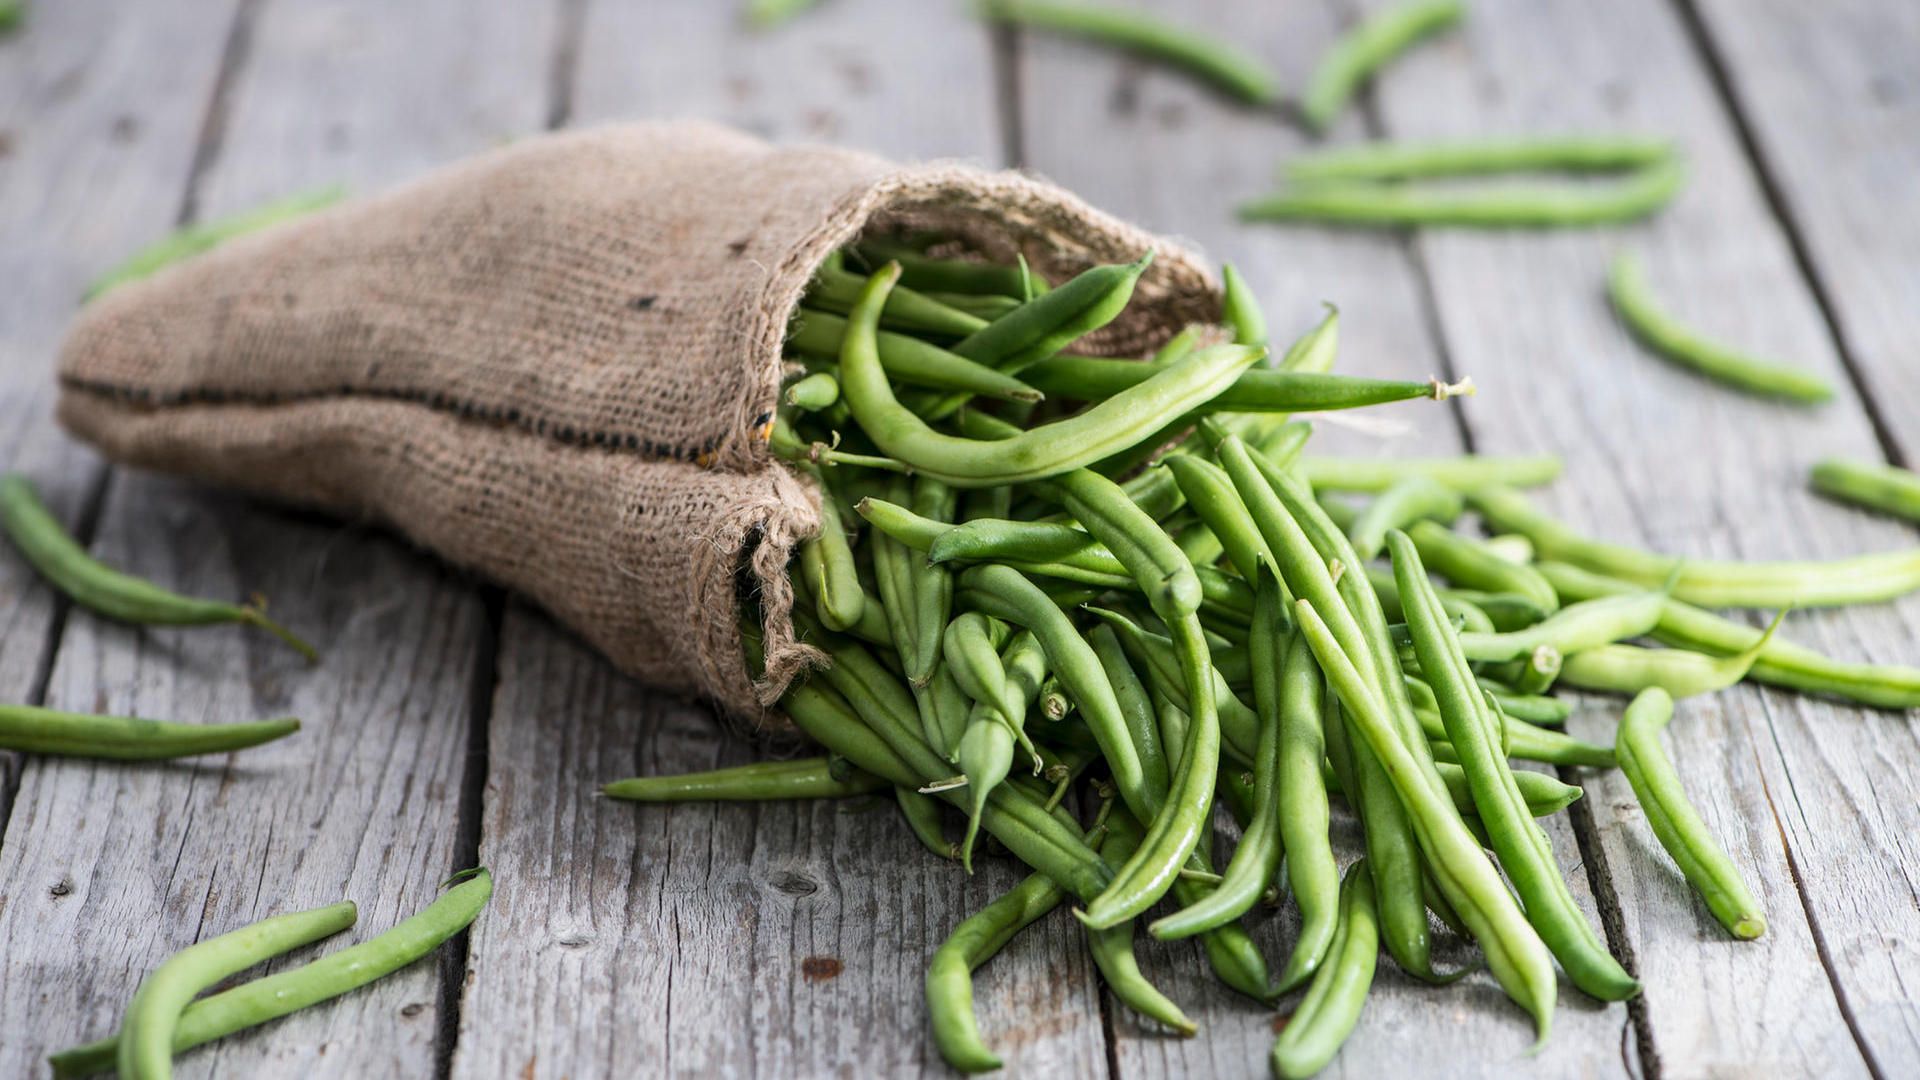 Are raw green beans toxic?